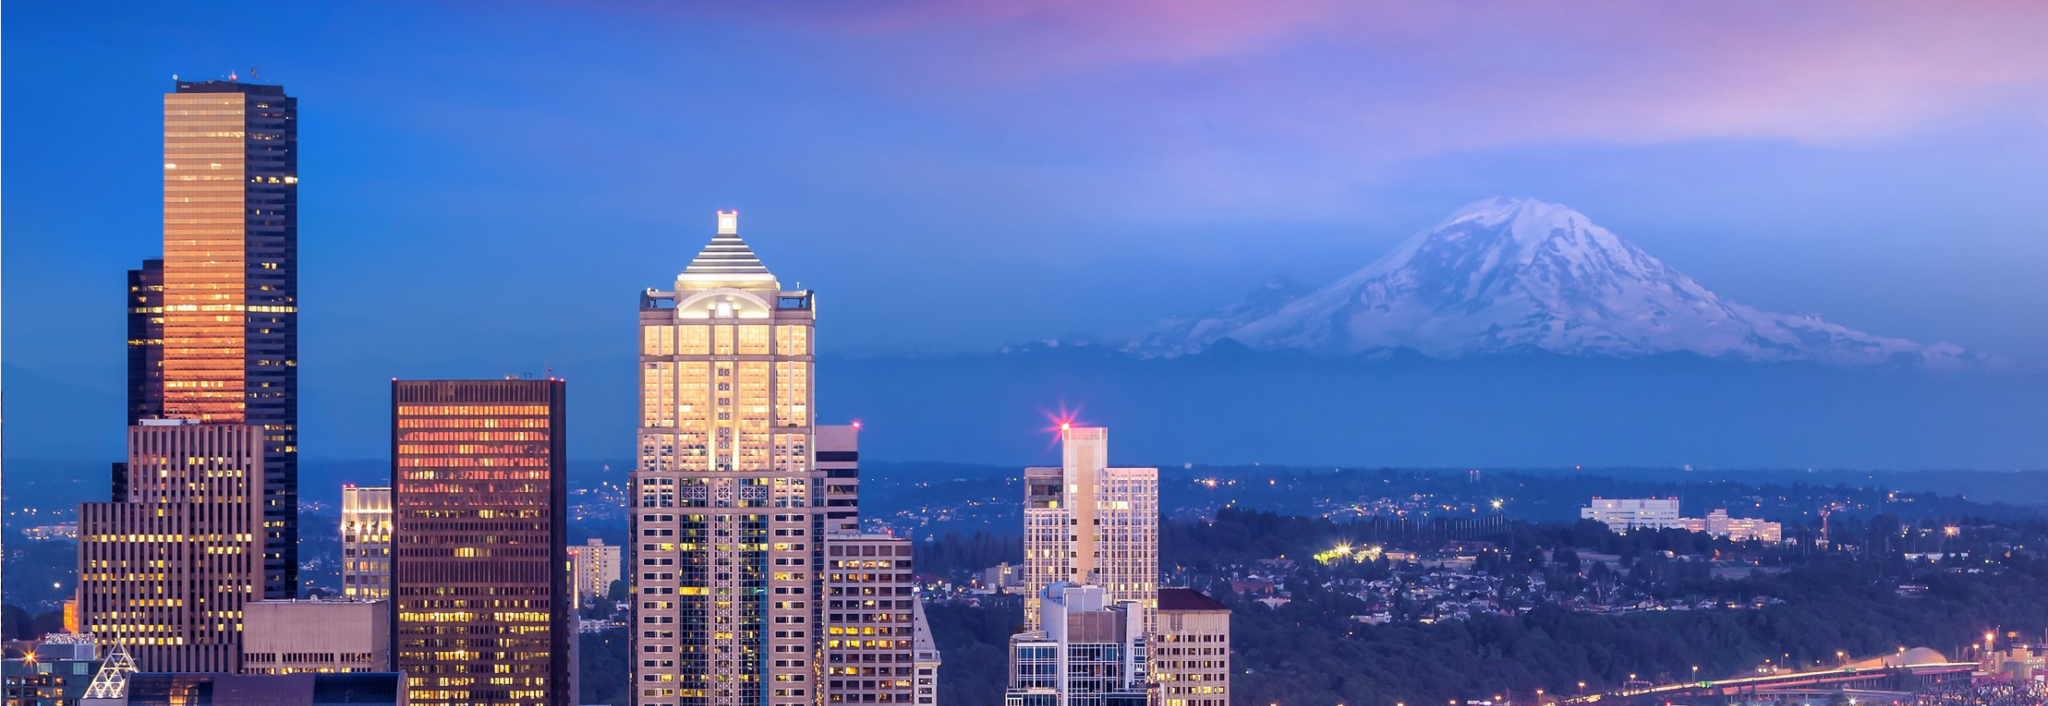 Image of downtown Seattle overlooking Mt. Rainier at dusk